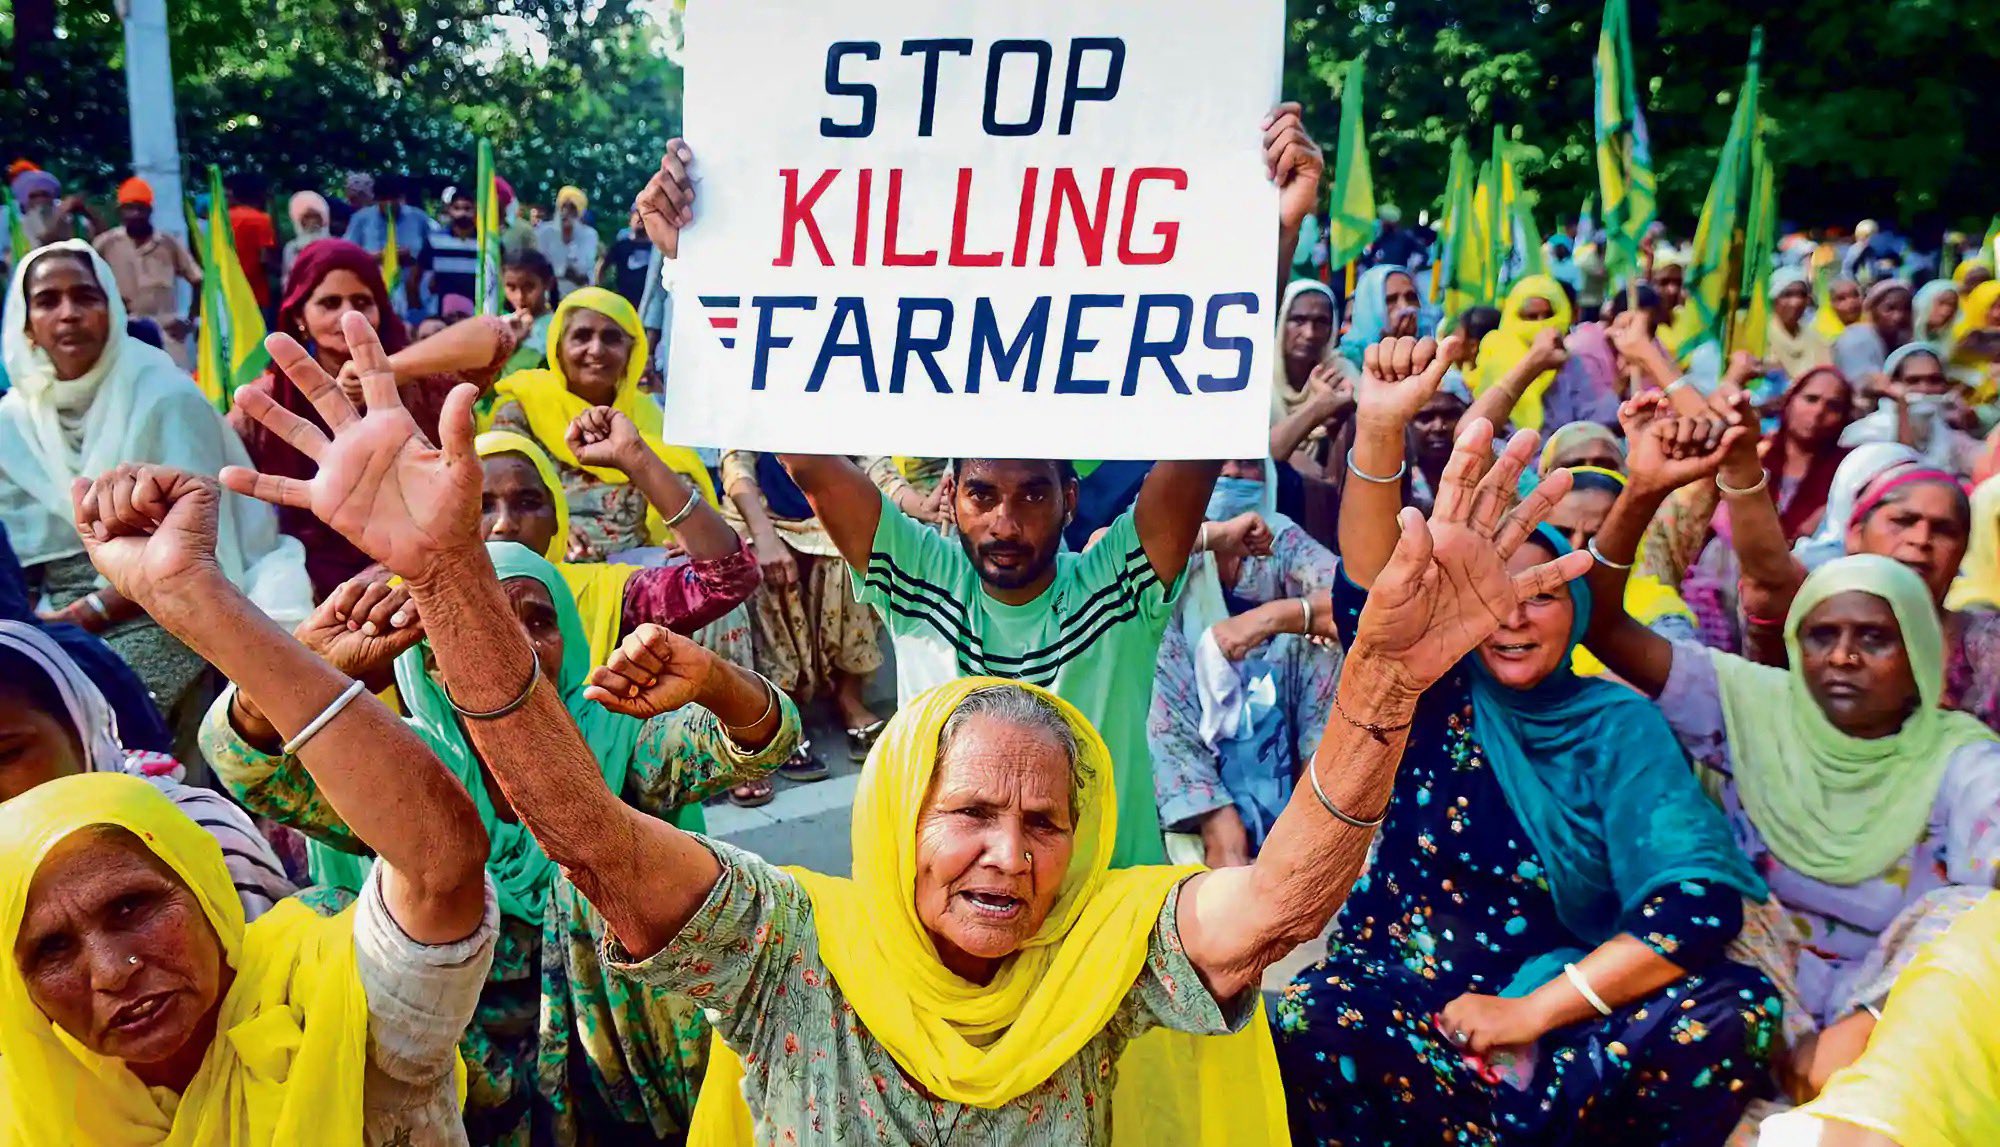 #WorldSupportsIndianFarmers trends on twitter after Rihanna brings global attention to farmers protest